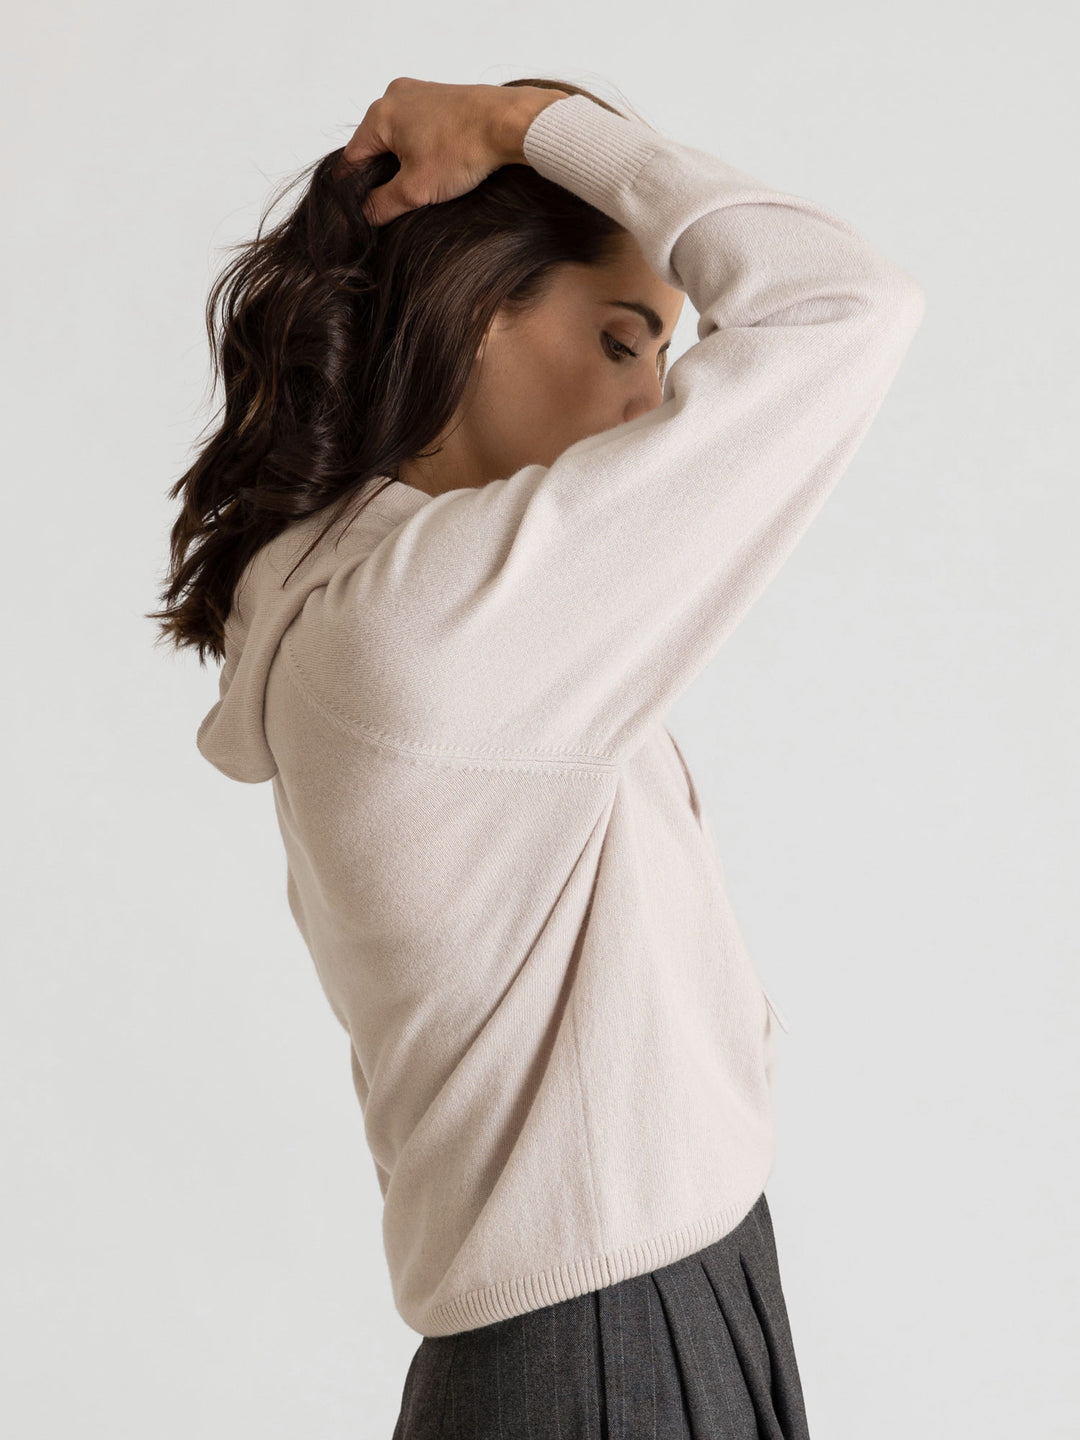 cashmere hoodie 100% pure cashmere. Color pearl, beige.